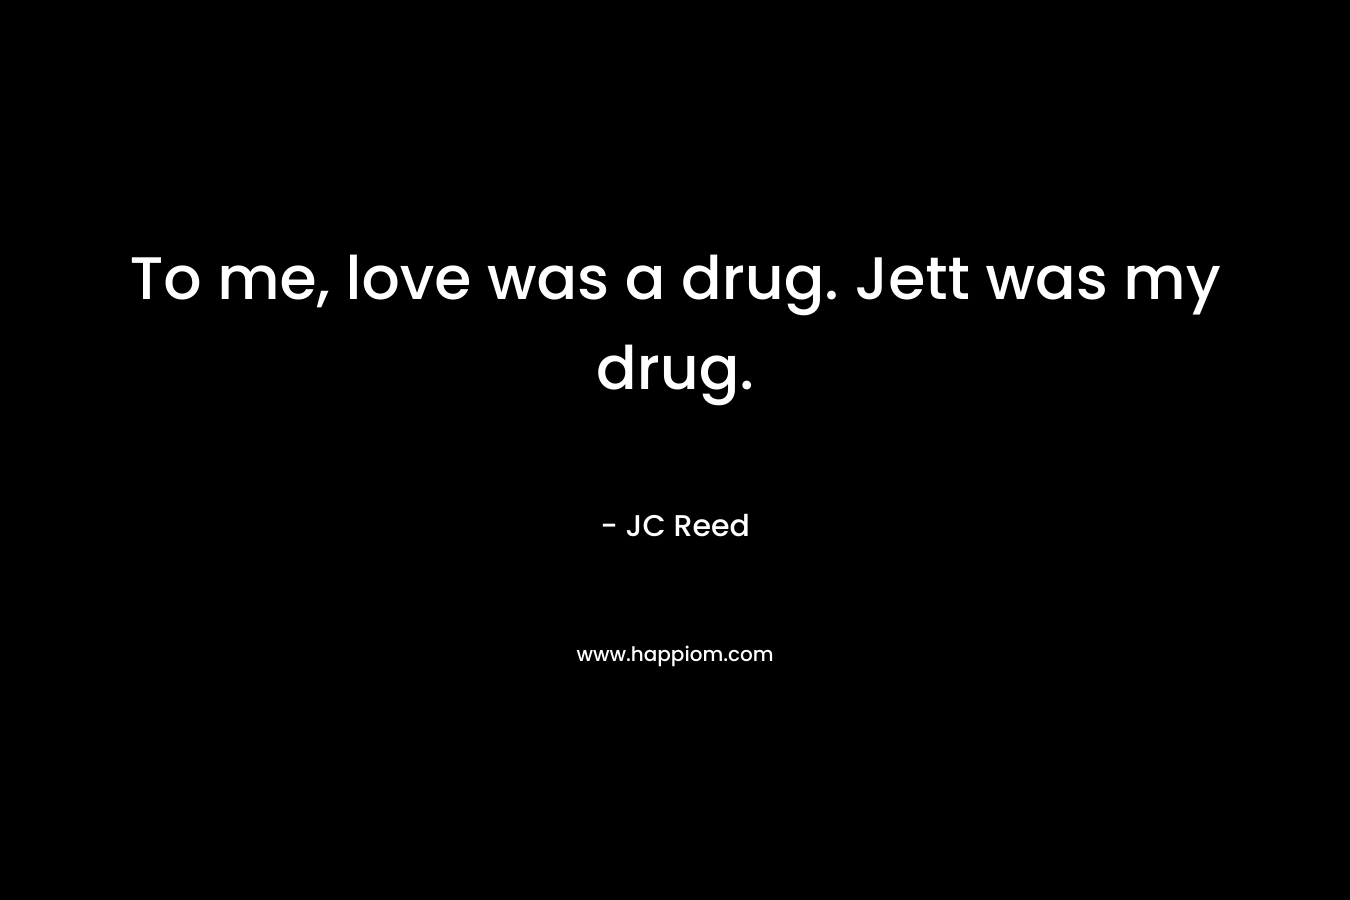 To me, love was a drug. Jett was my drug.